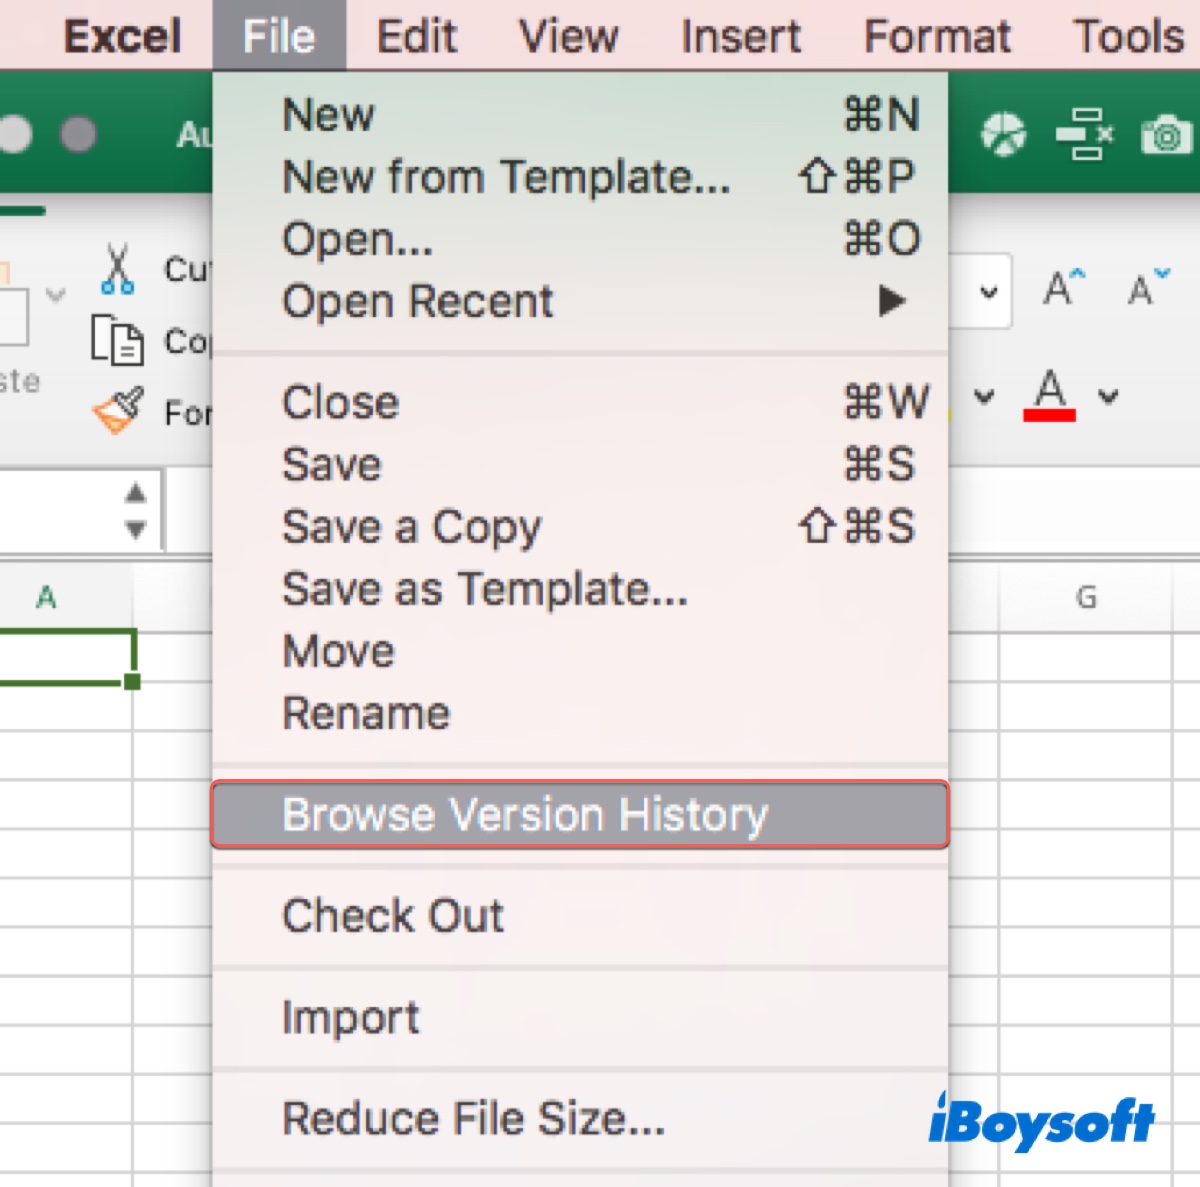 Browse Version History grayed out on Excel